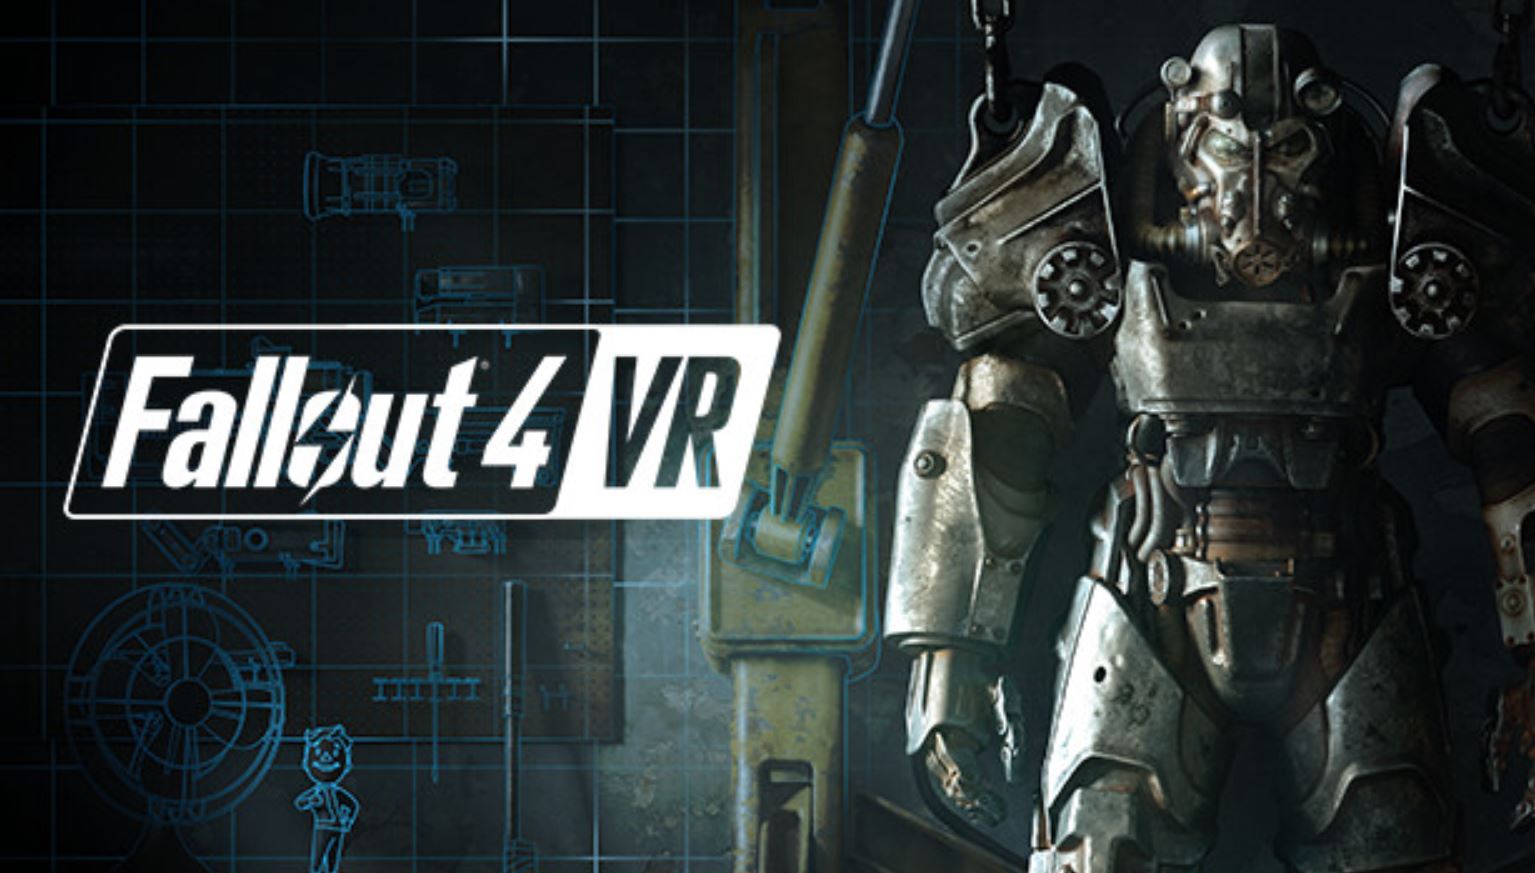 Fallout 4 in VR cover